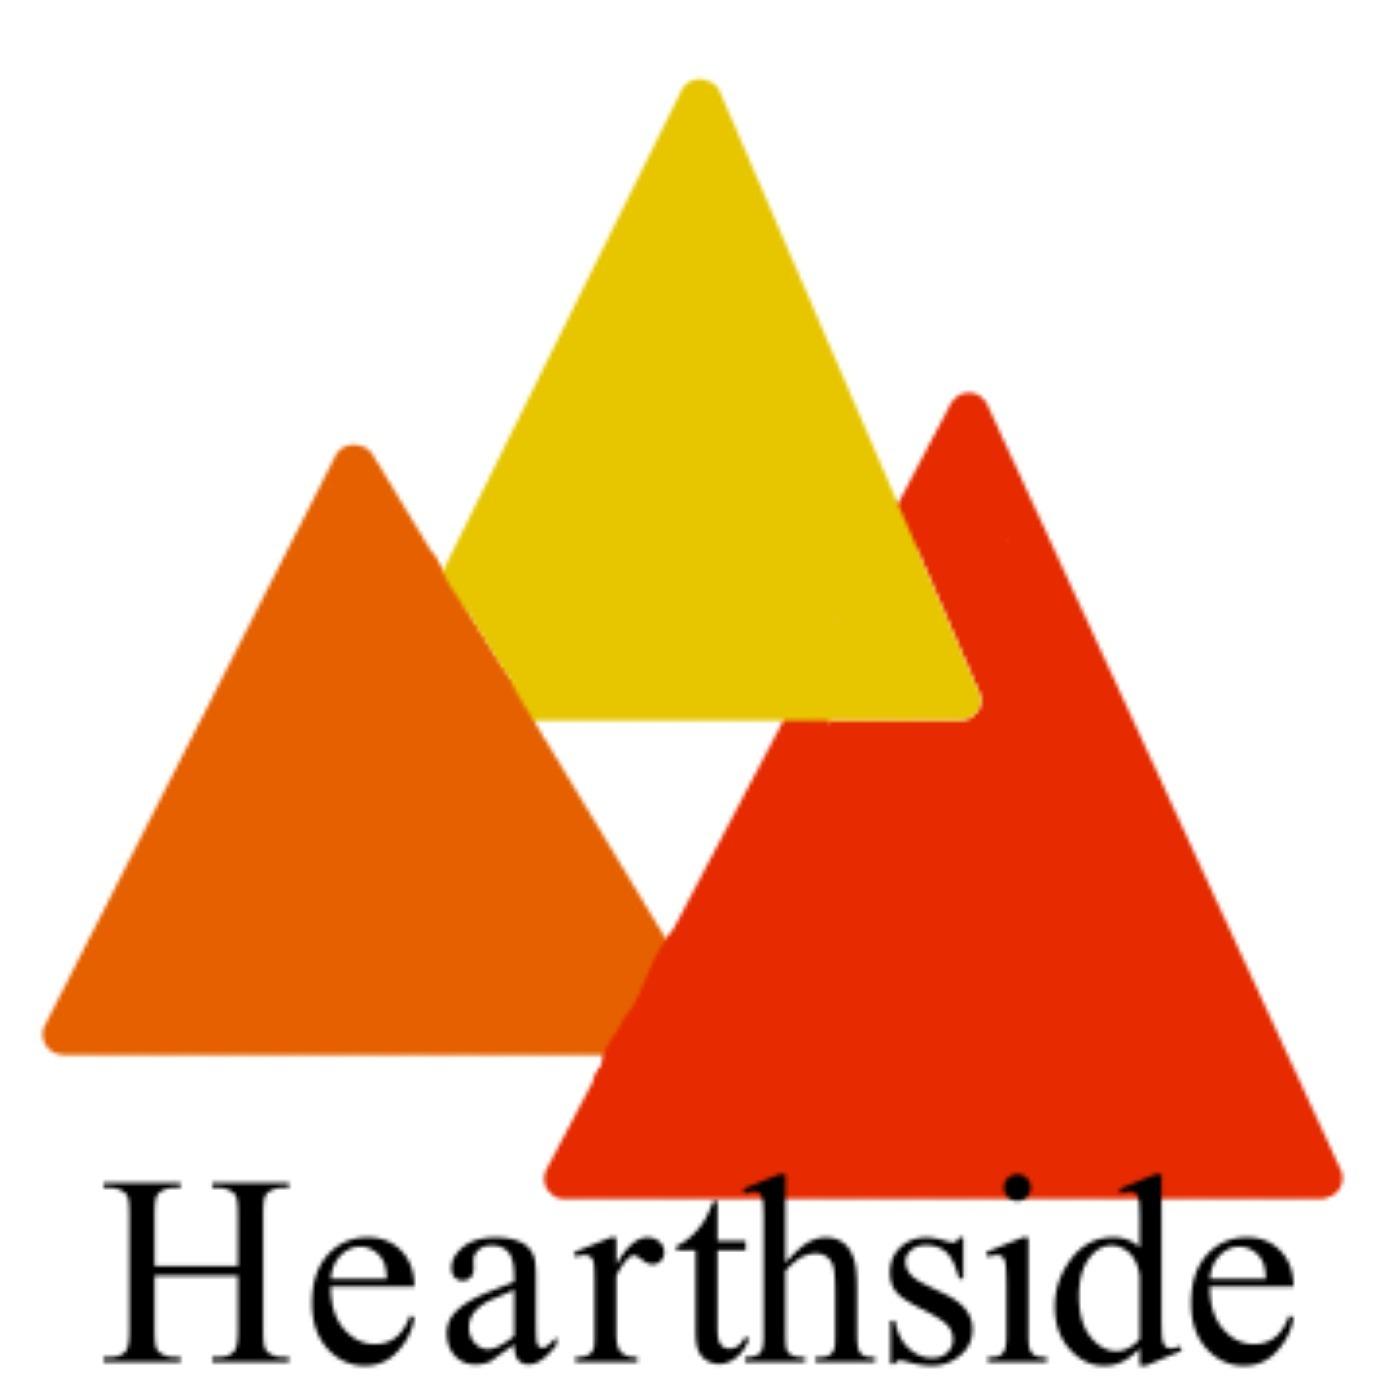 Hearthside Chats: Extracurricular